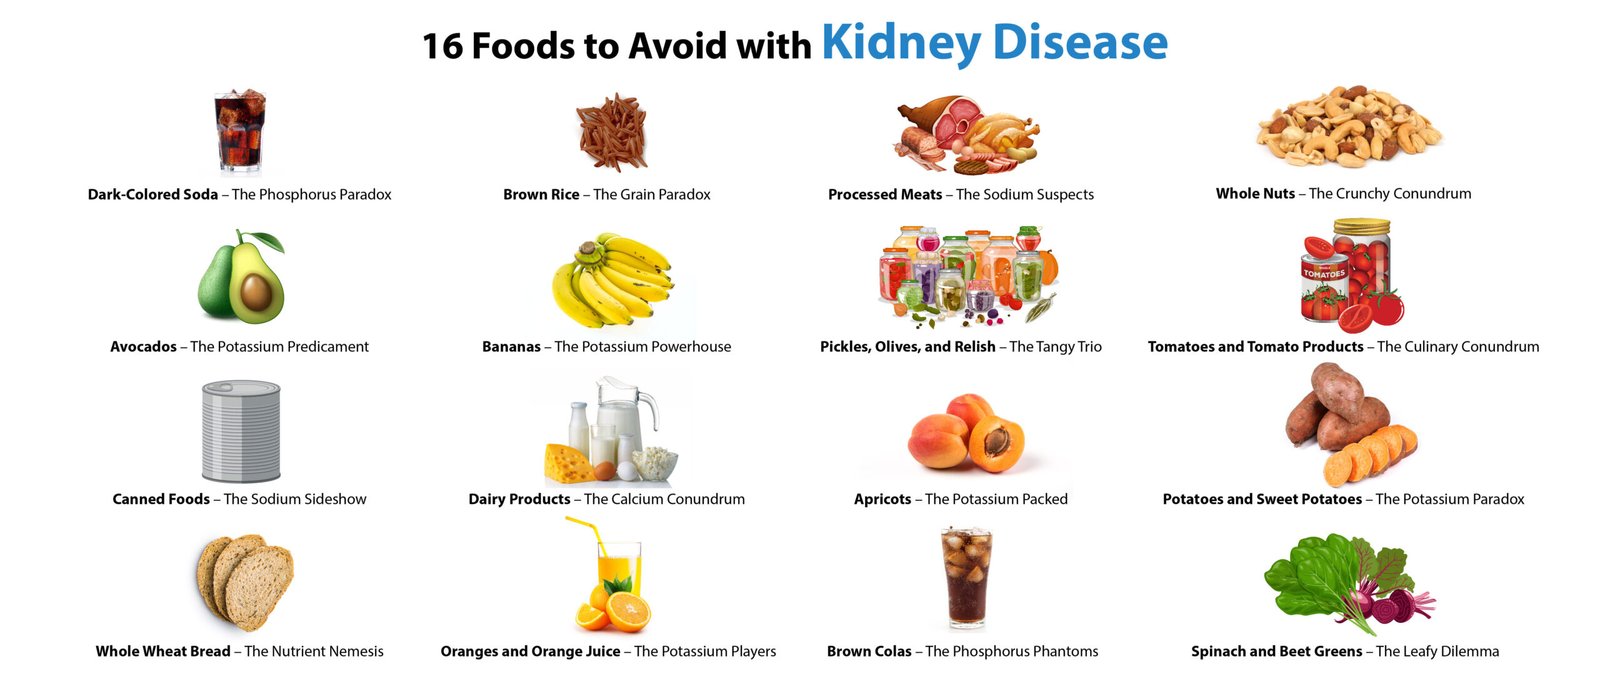 16 Foods to avoid with kidney Disease